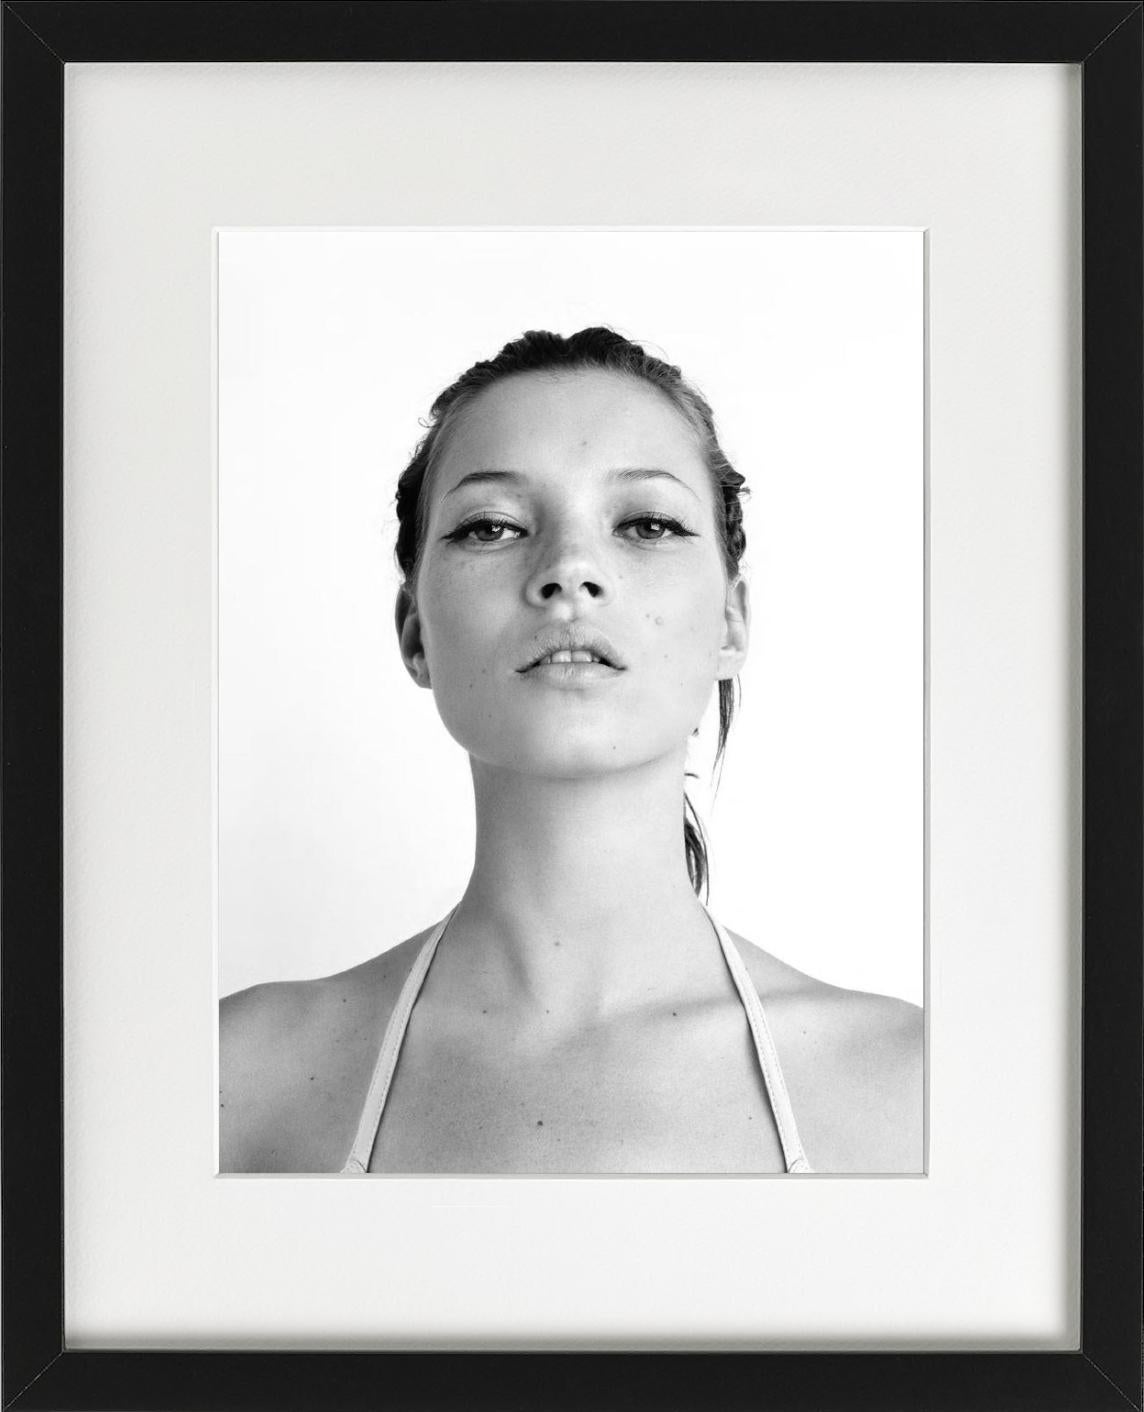 Kate's Look - portrait of the supermodel Kate Moss, fine art photography, 1998 - Contemporary Photograph by Rankin